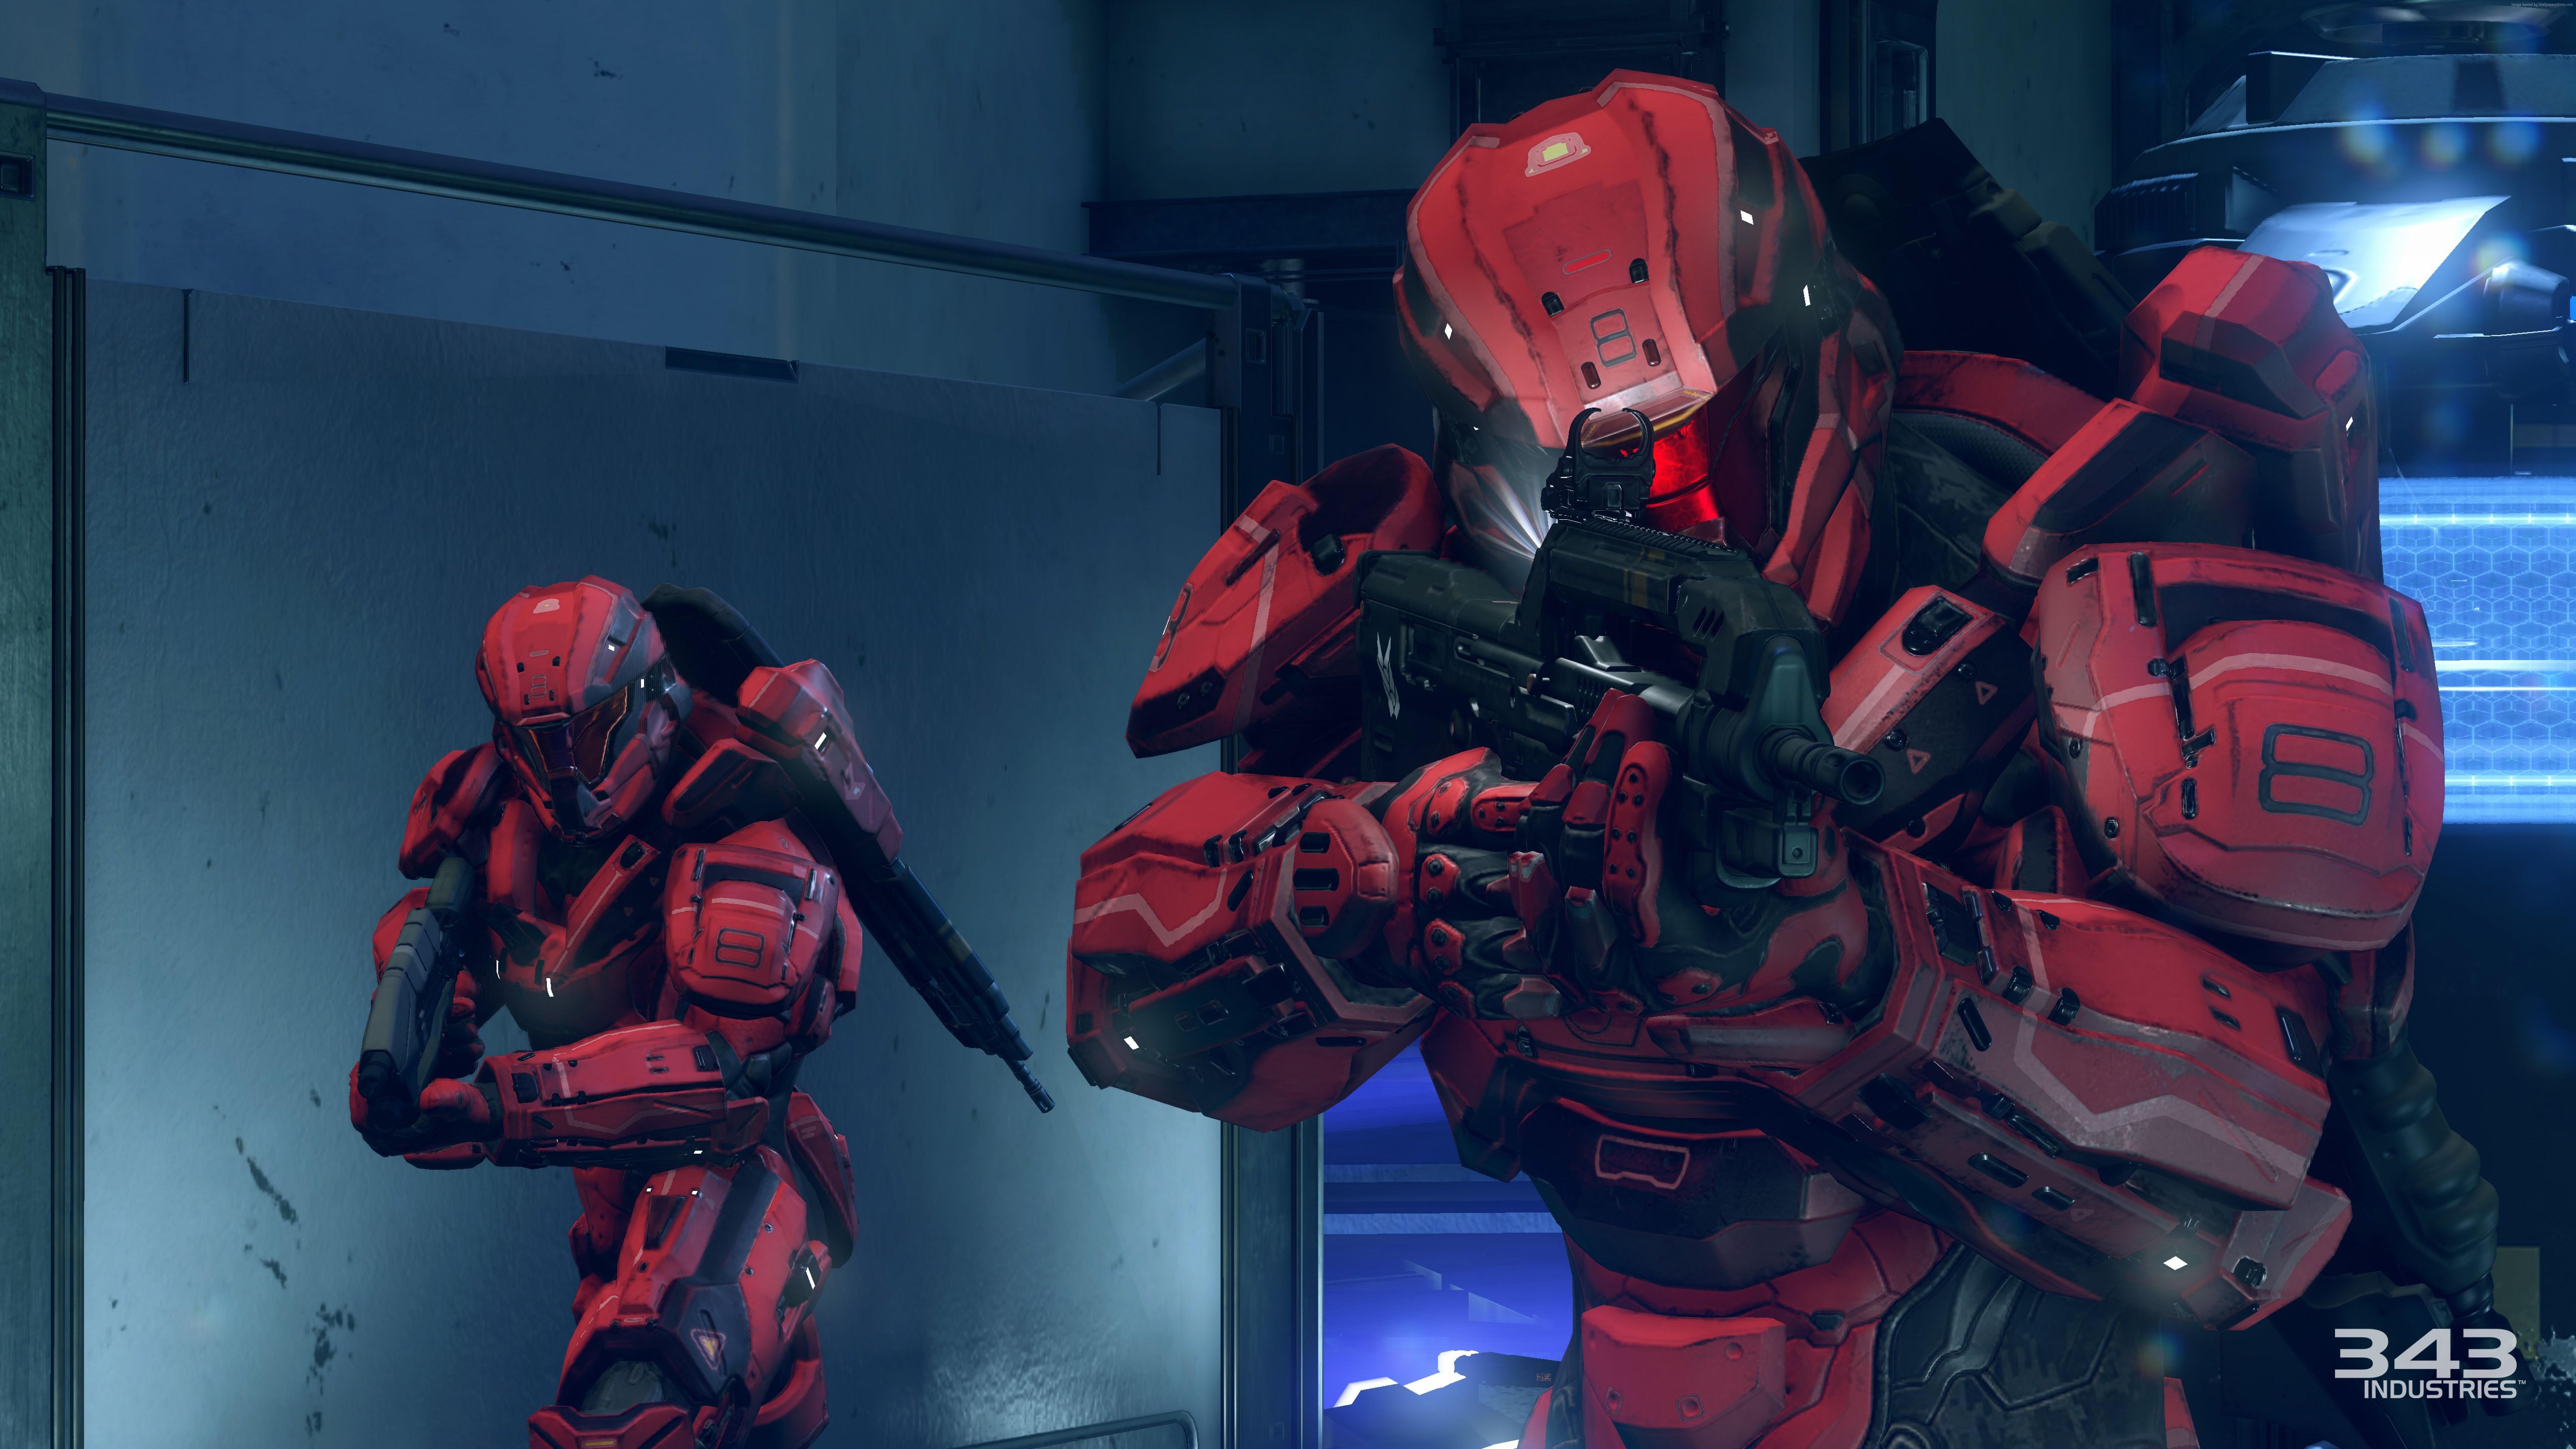 #robots, #Halo 5: Guardians, #game, #fps, #red, #space, k